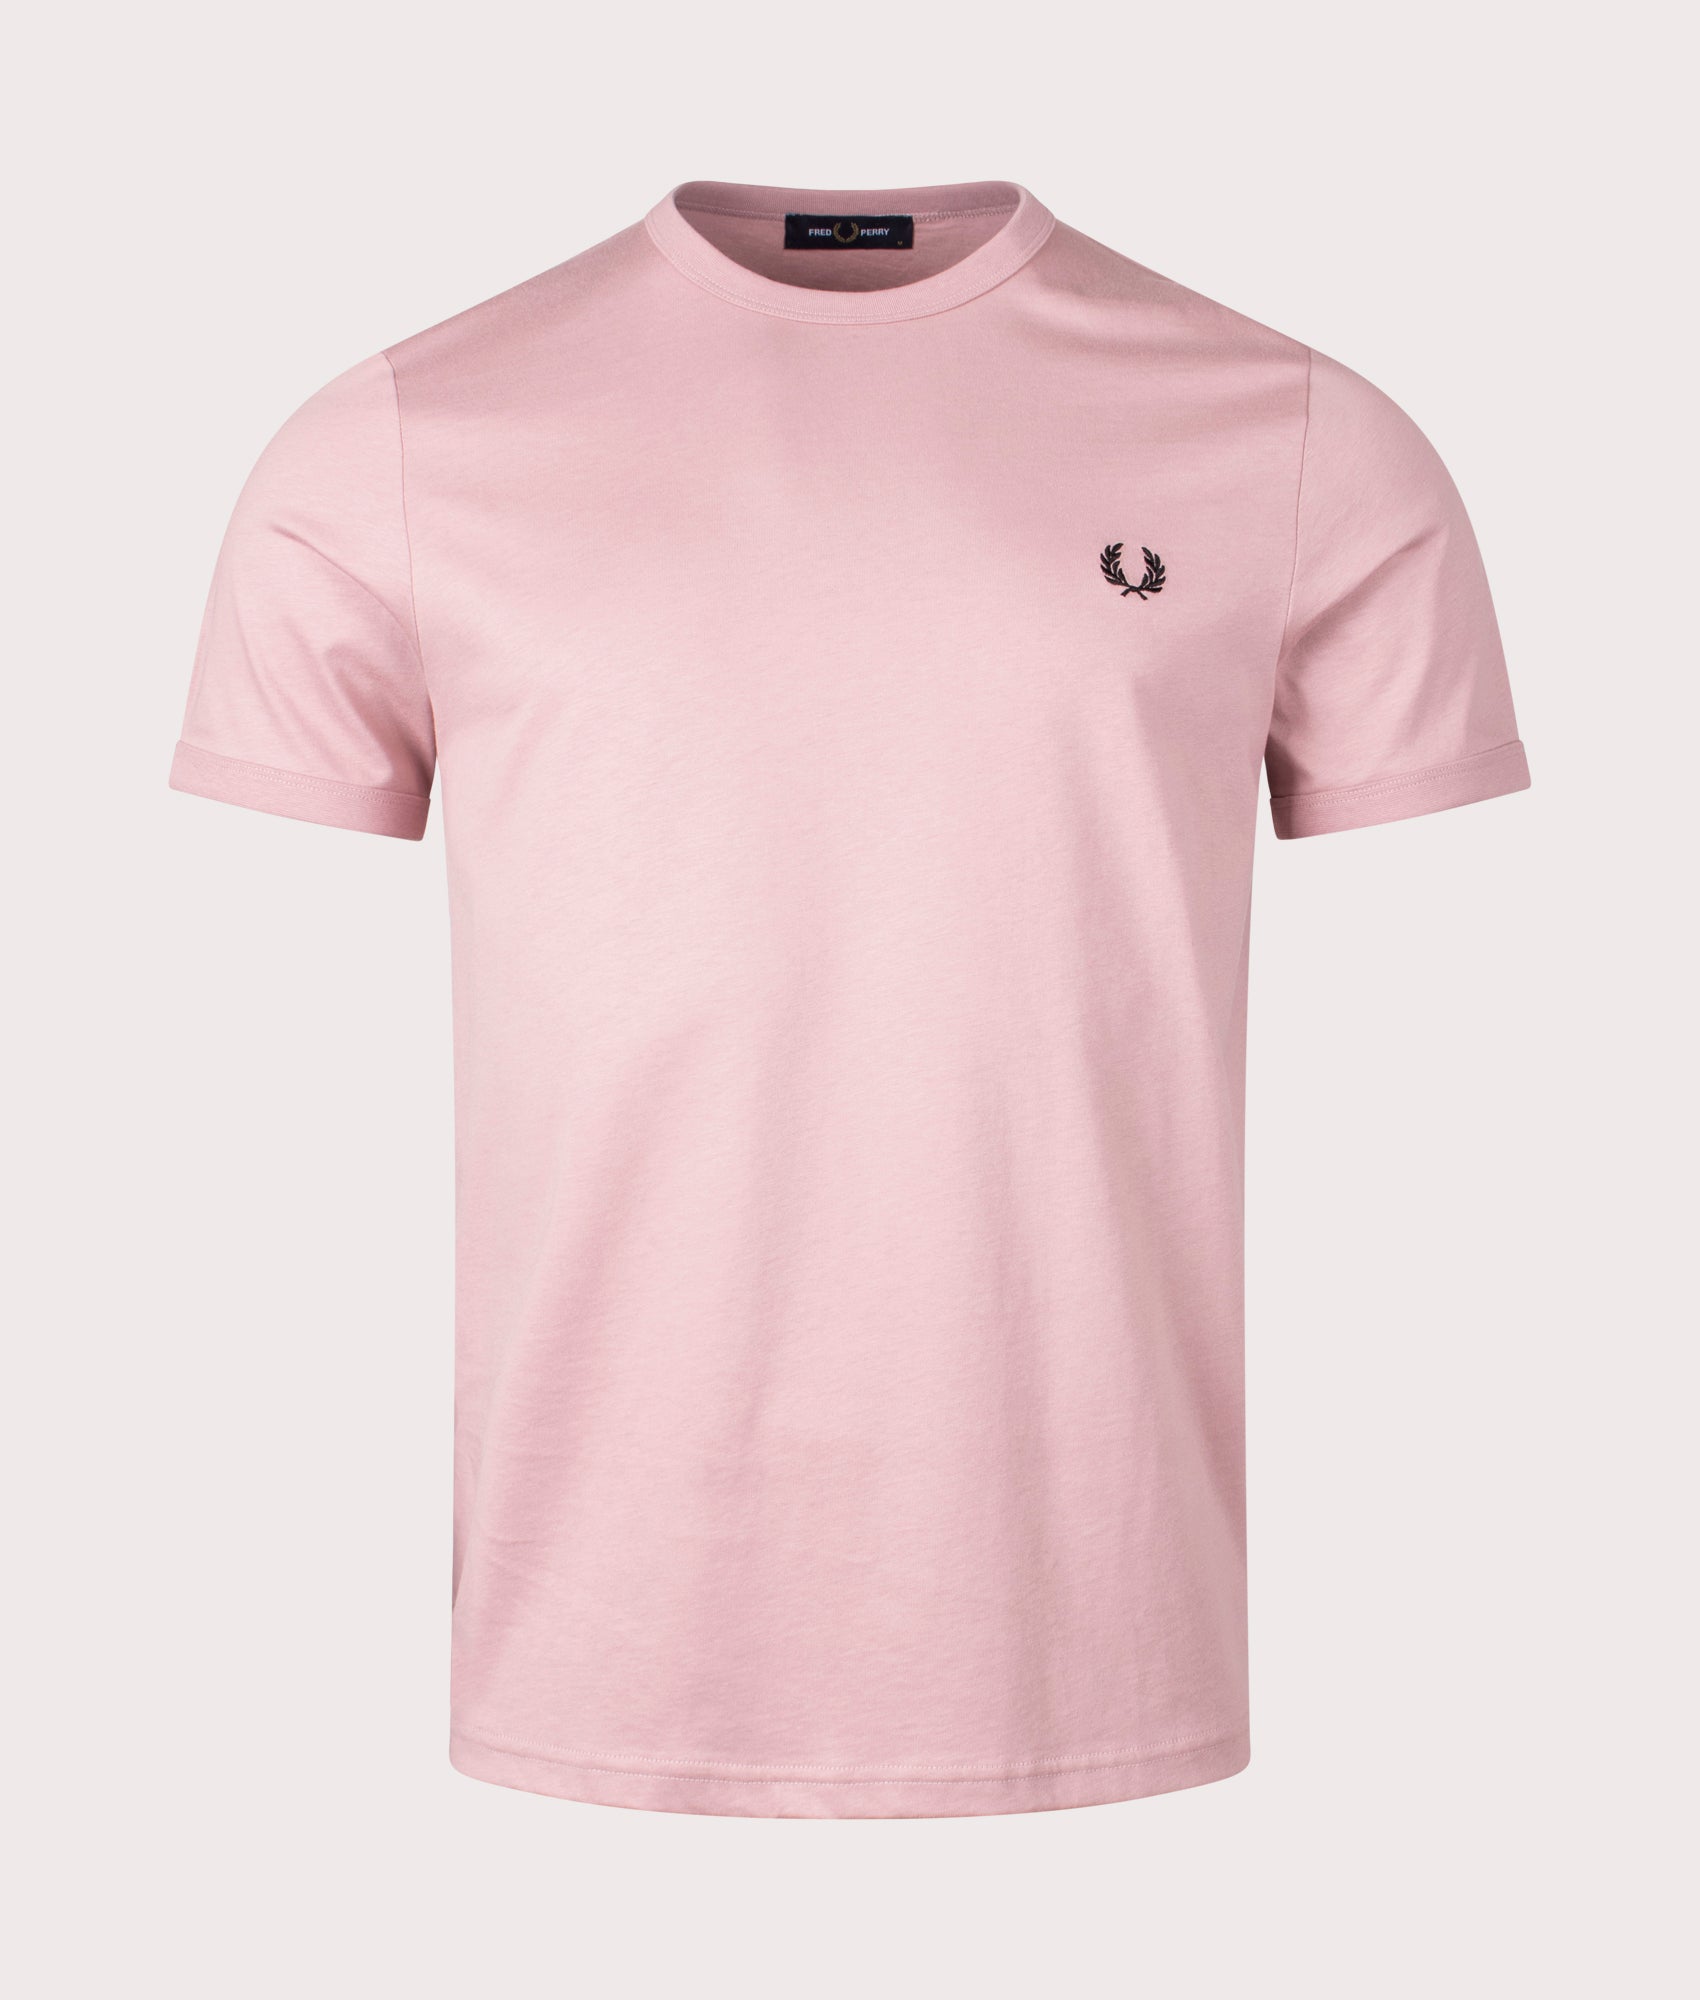 Fred Perry Mens Ringer T-Shirt - Colour: S51 Dusty Rose Pink - Size: Medium